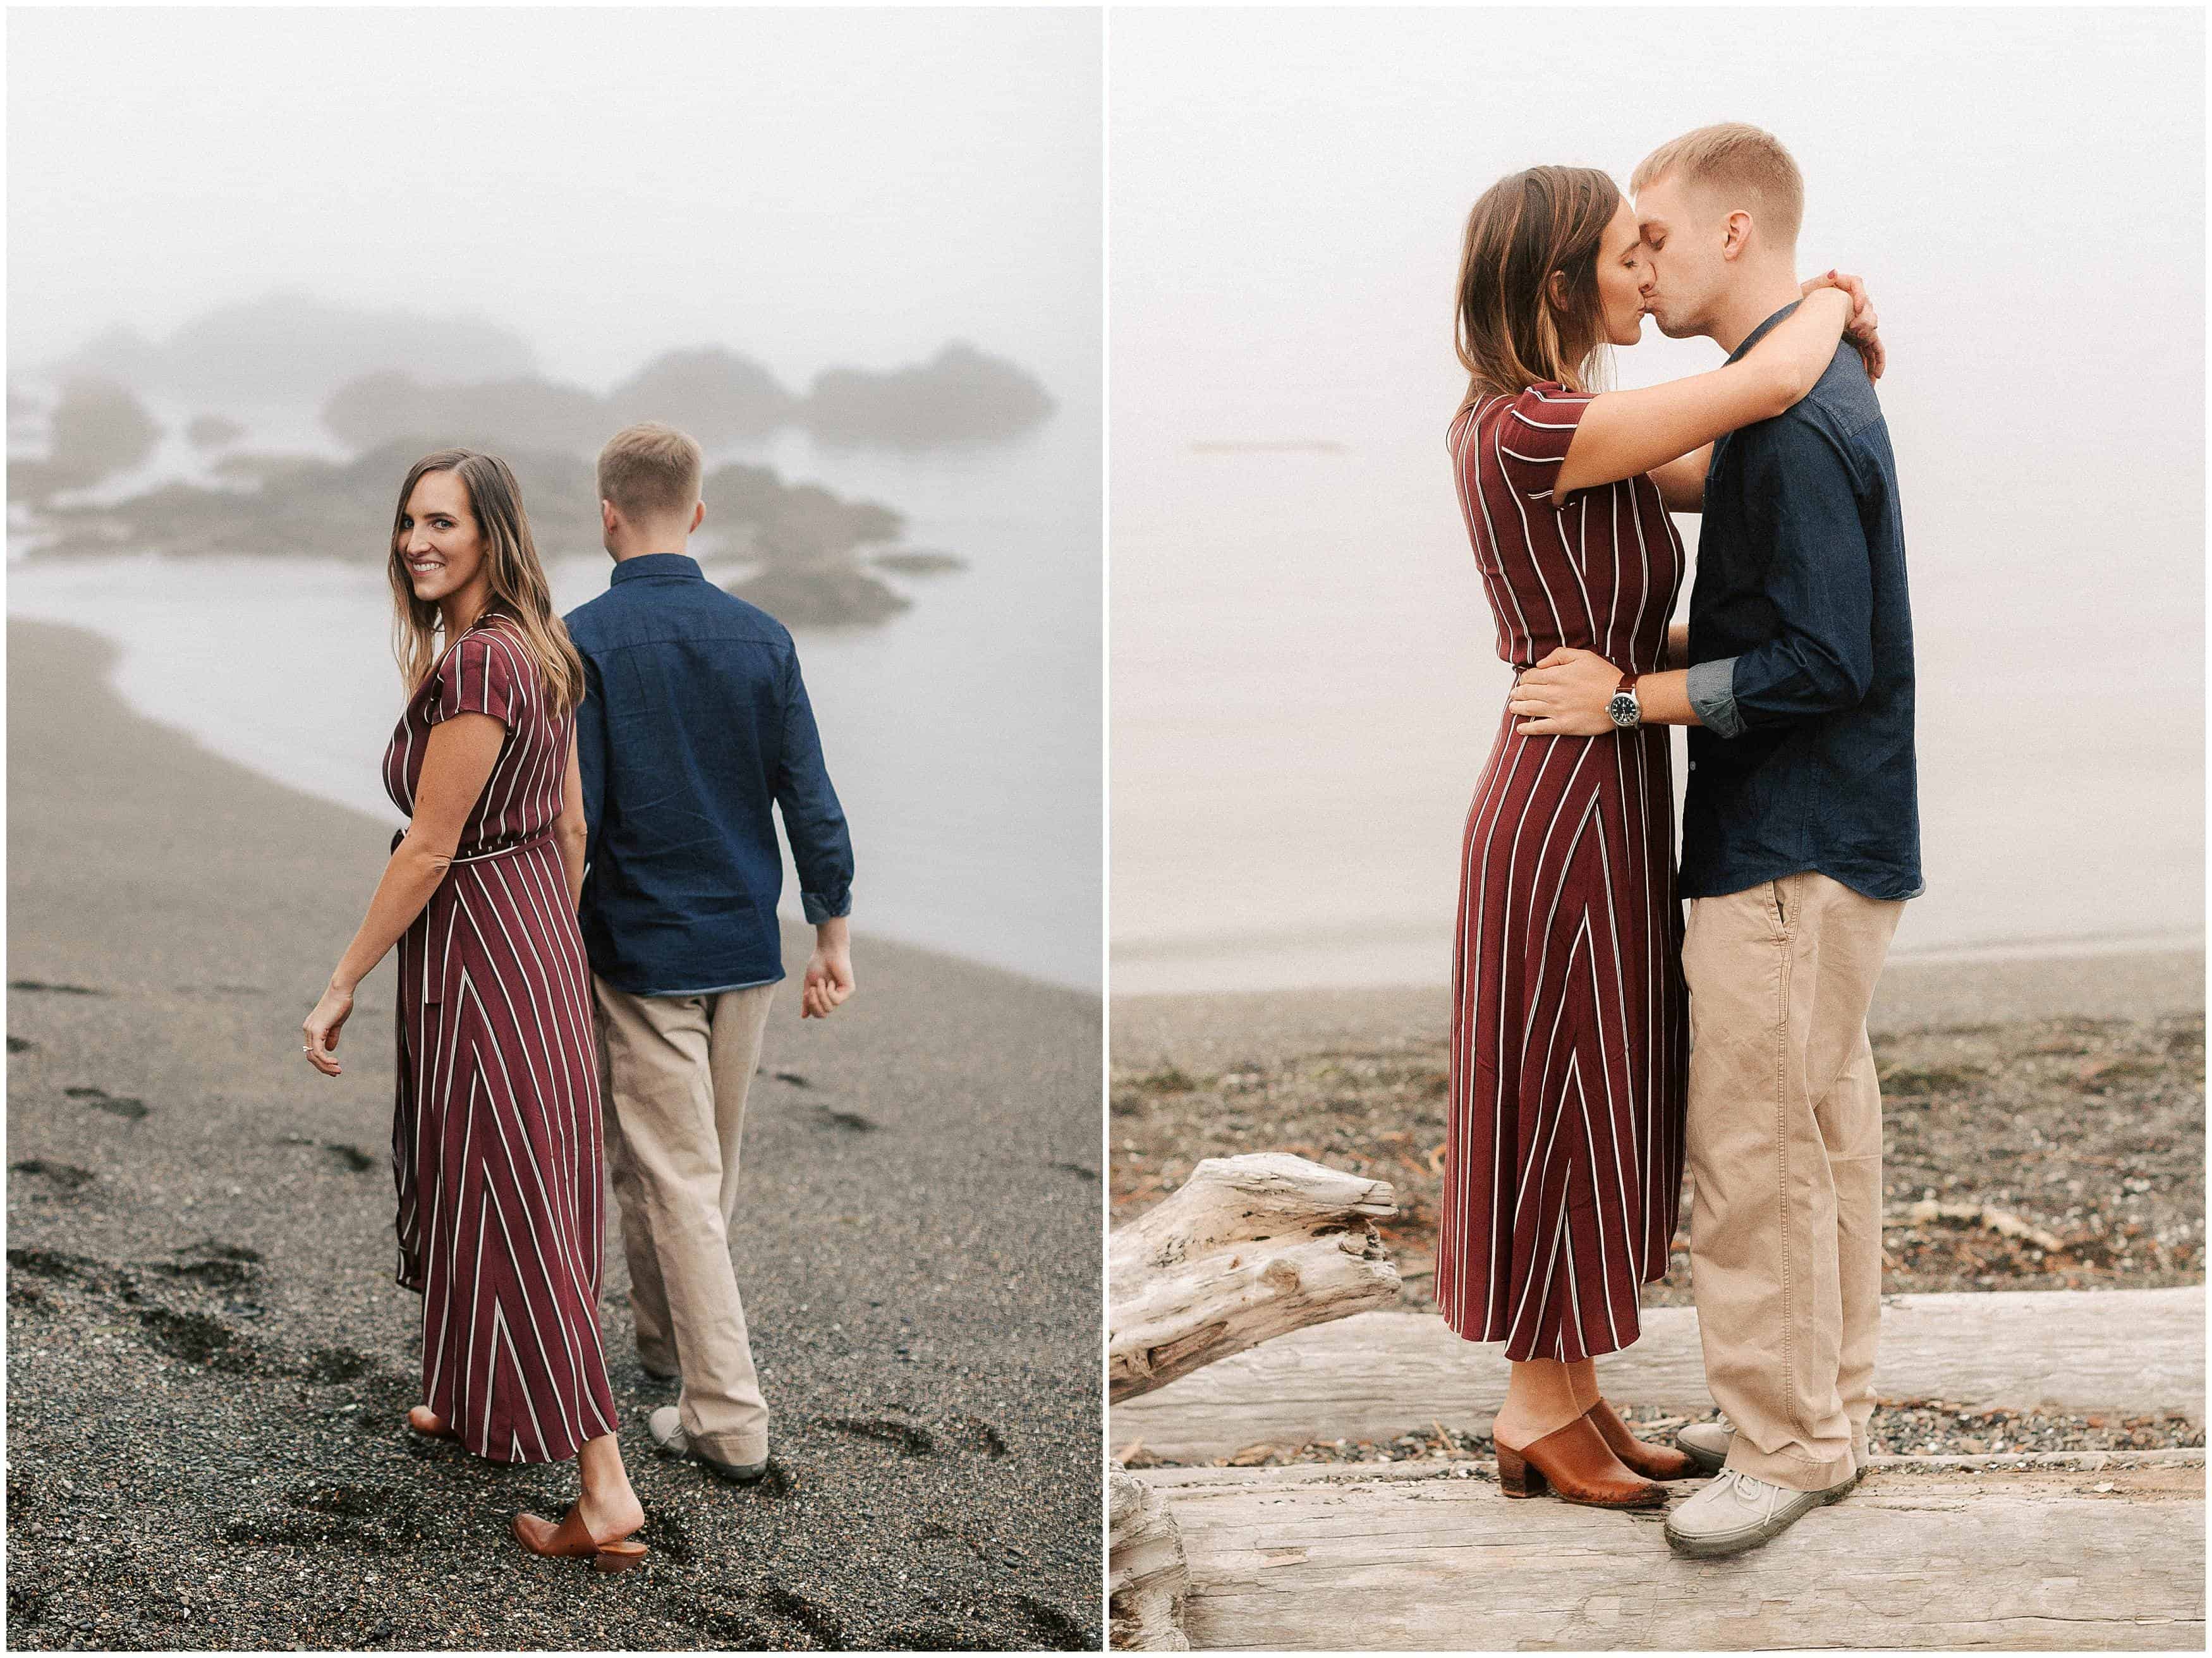 Outdoor engagement photos in the PNW by Kyle Goldie of Luma Weddings